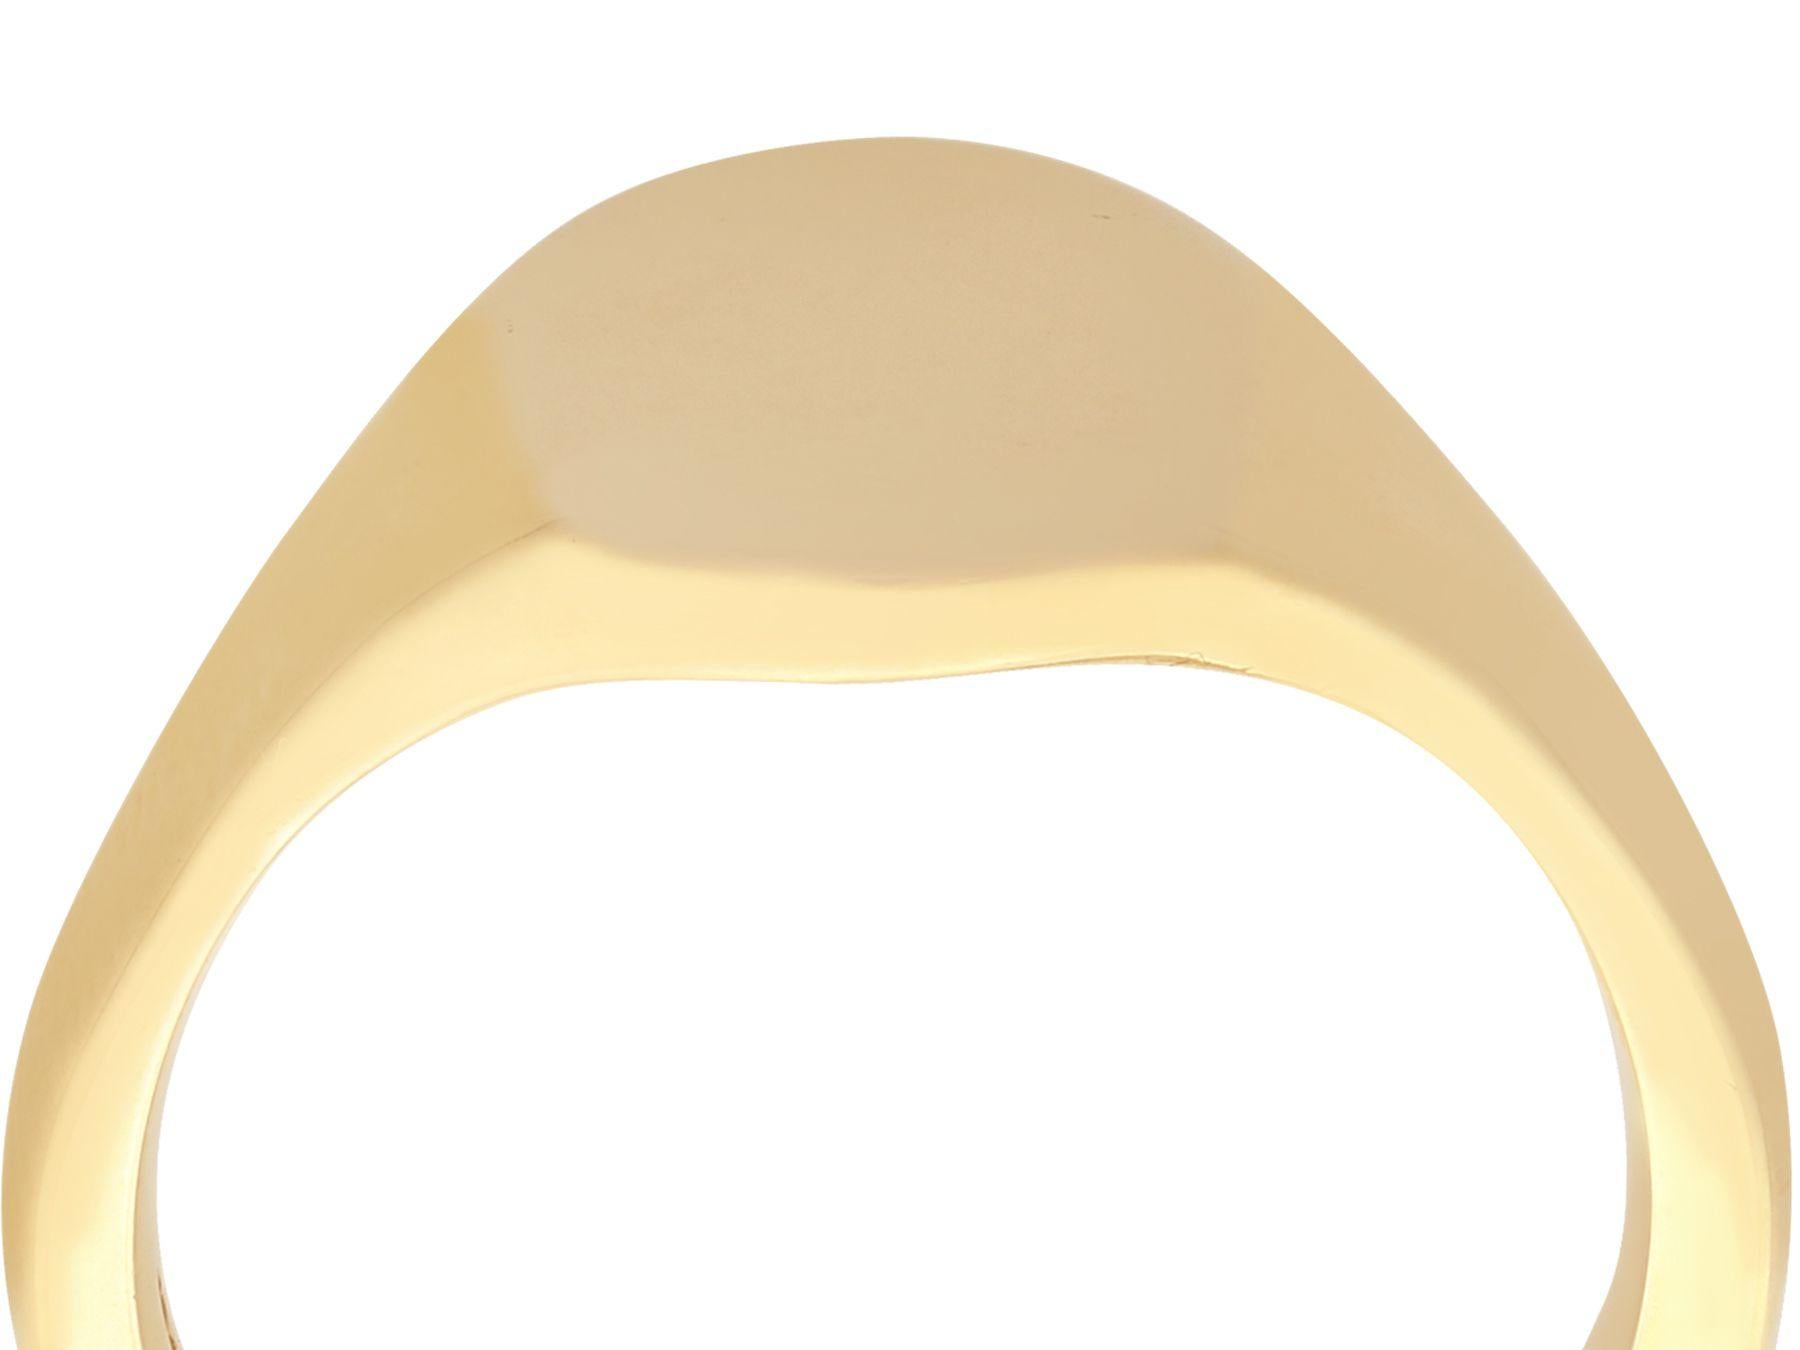 A fine and impressive vintage plain 9 karat yellow gold men's signet ring; part of our diverse vintage jewelry and estate jewelry collections.

This fine and impressive vintage signet ring has been crafted in 9k yellow gold.

The oval face of signet